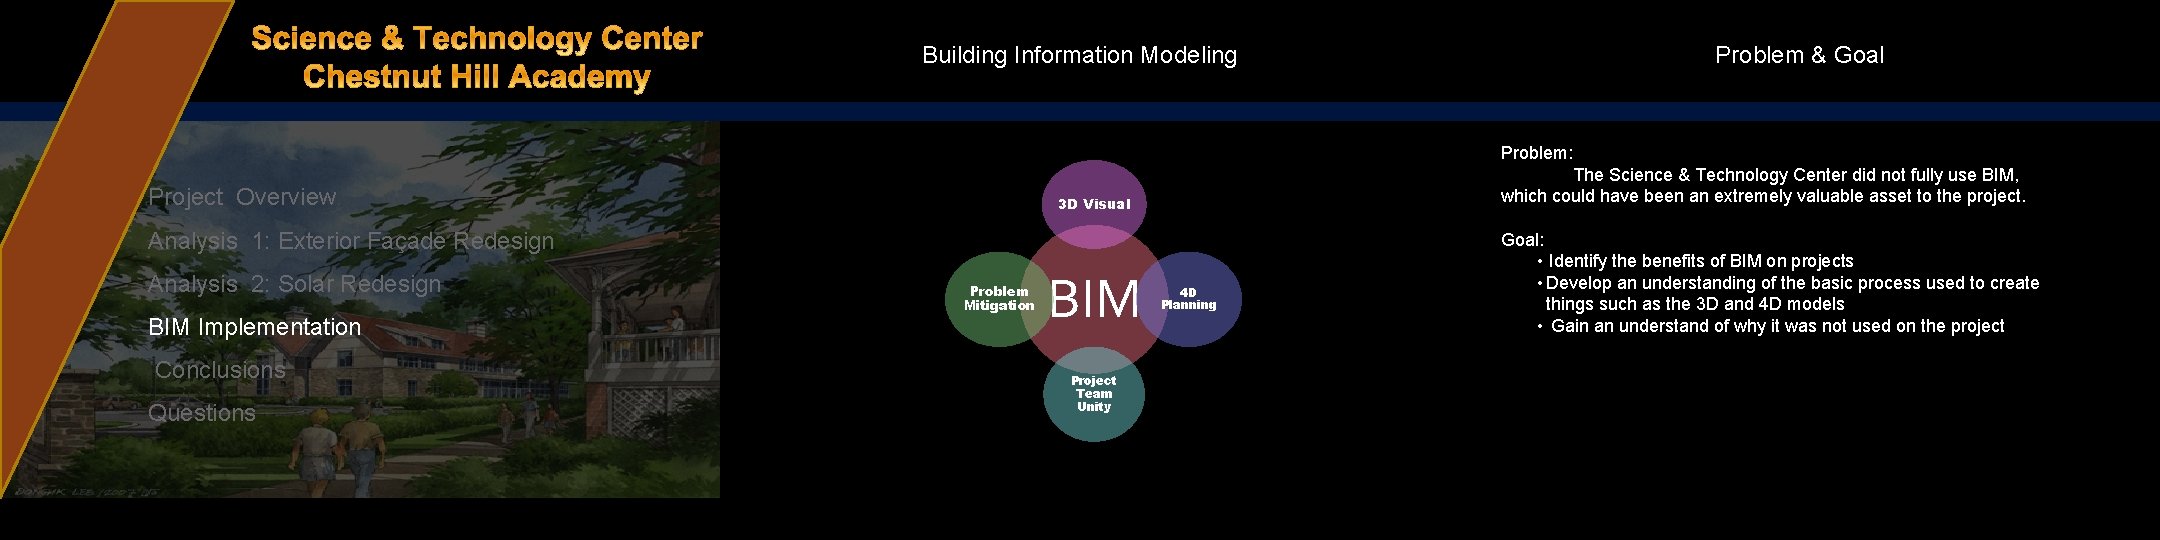 Problem & Goal Building Information Modeling Problem: Project Overview The Science & Technology Center